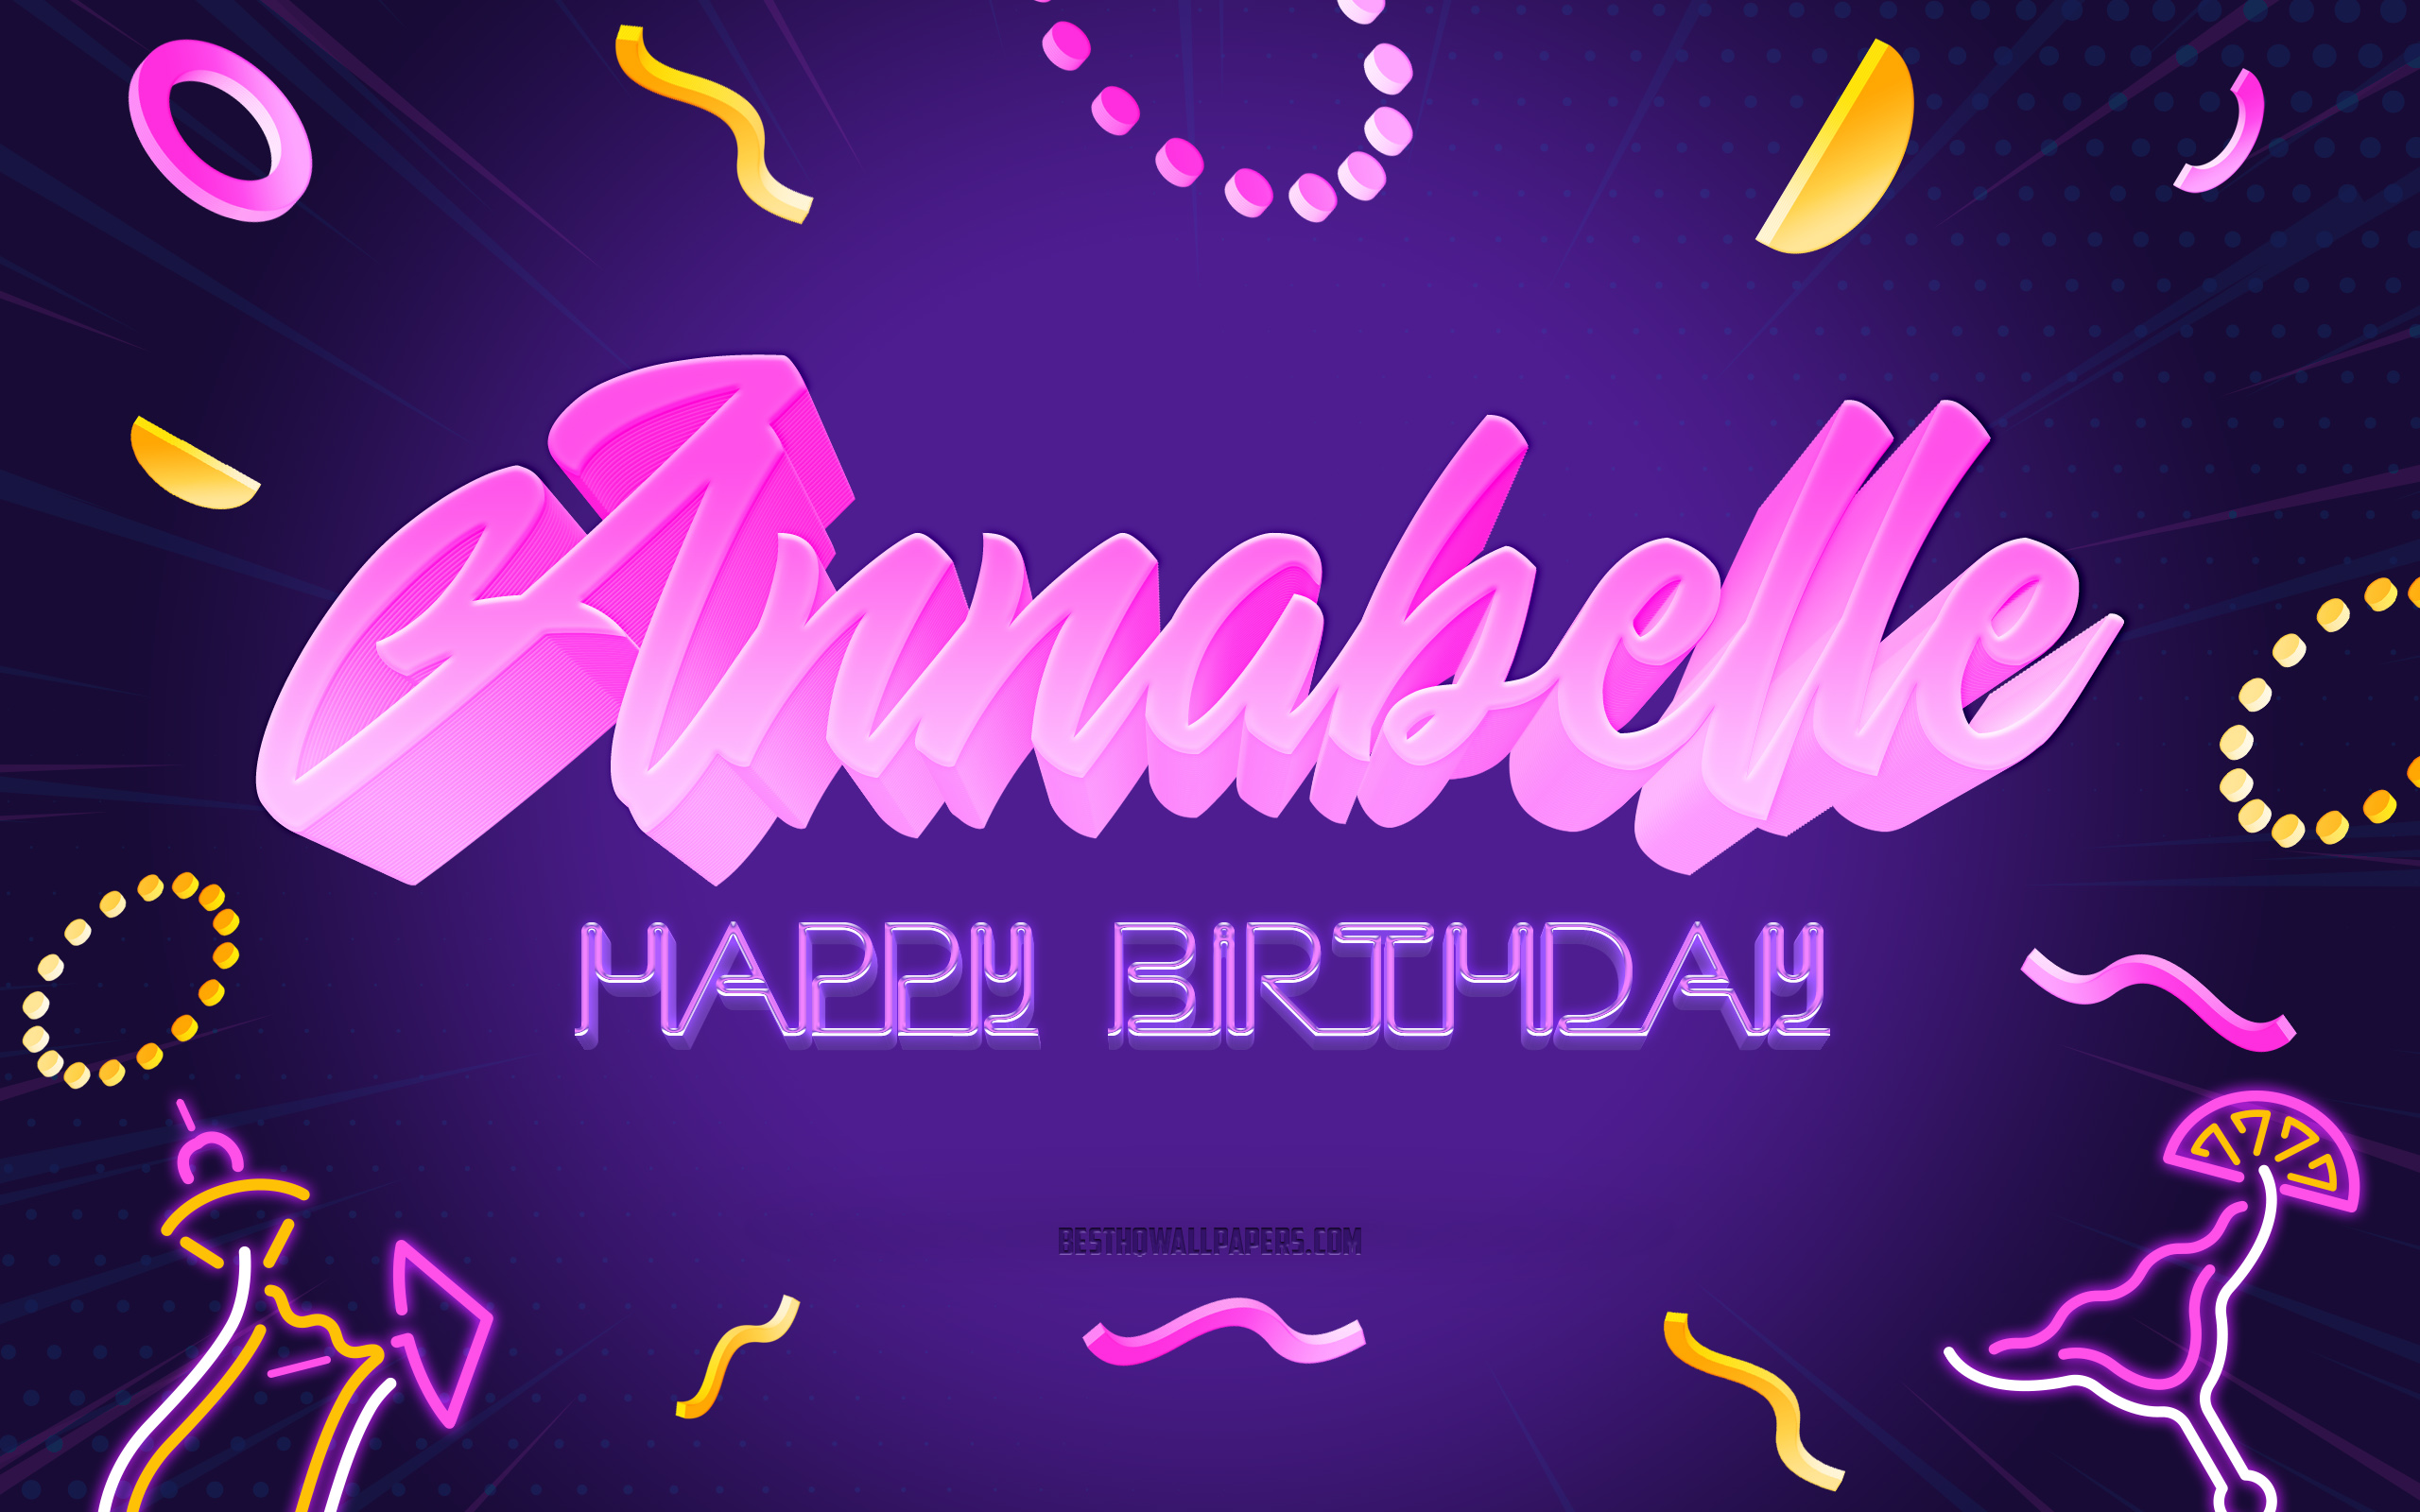 Download Wallpapers Happy Birthday Annabelle 4k Purple Party Background Annabelle Creative 4047